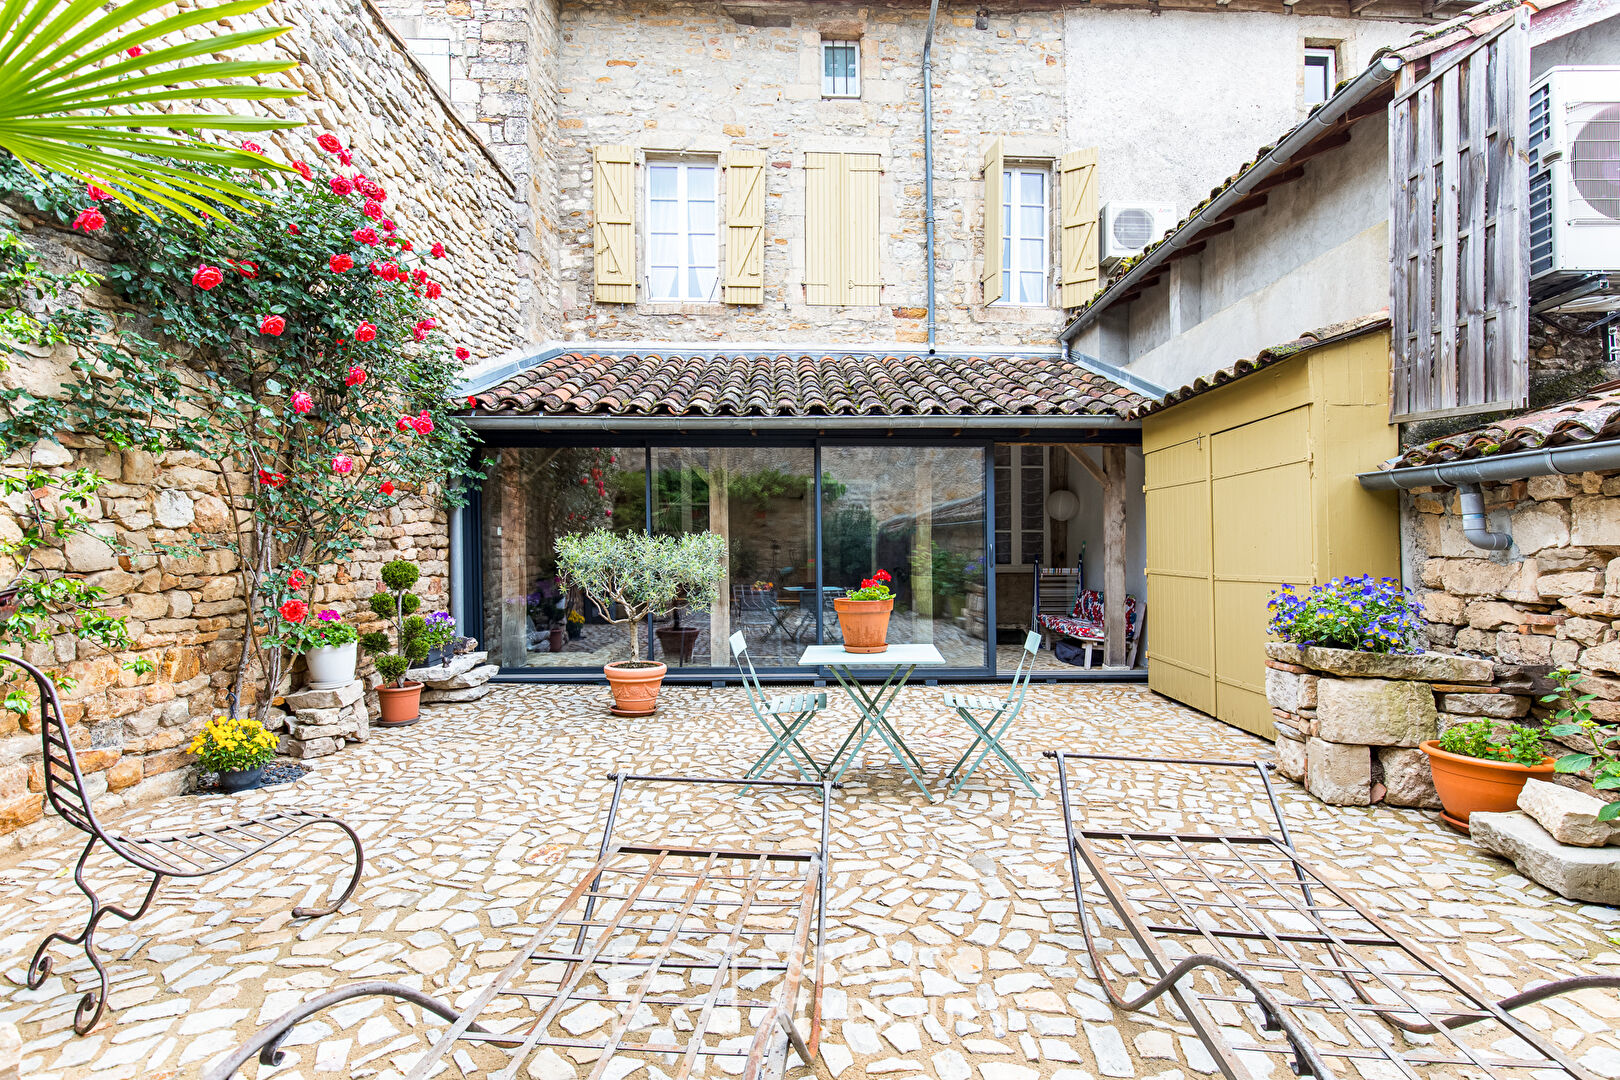 Building of character, Bed and Breakfast / Café in the heart of Bruniquel